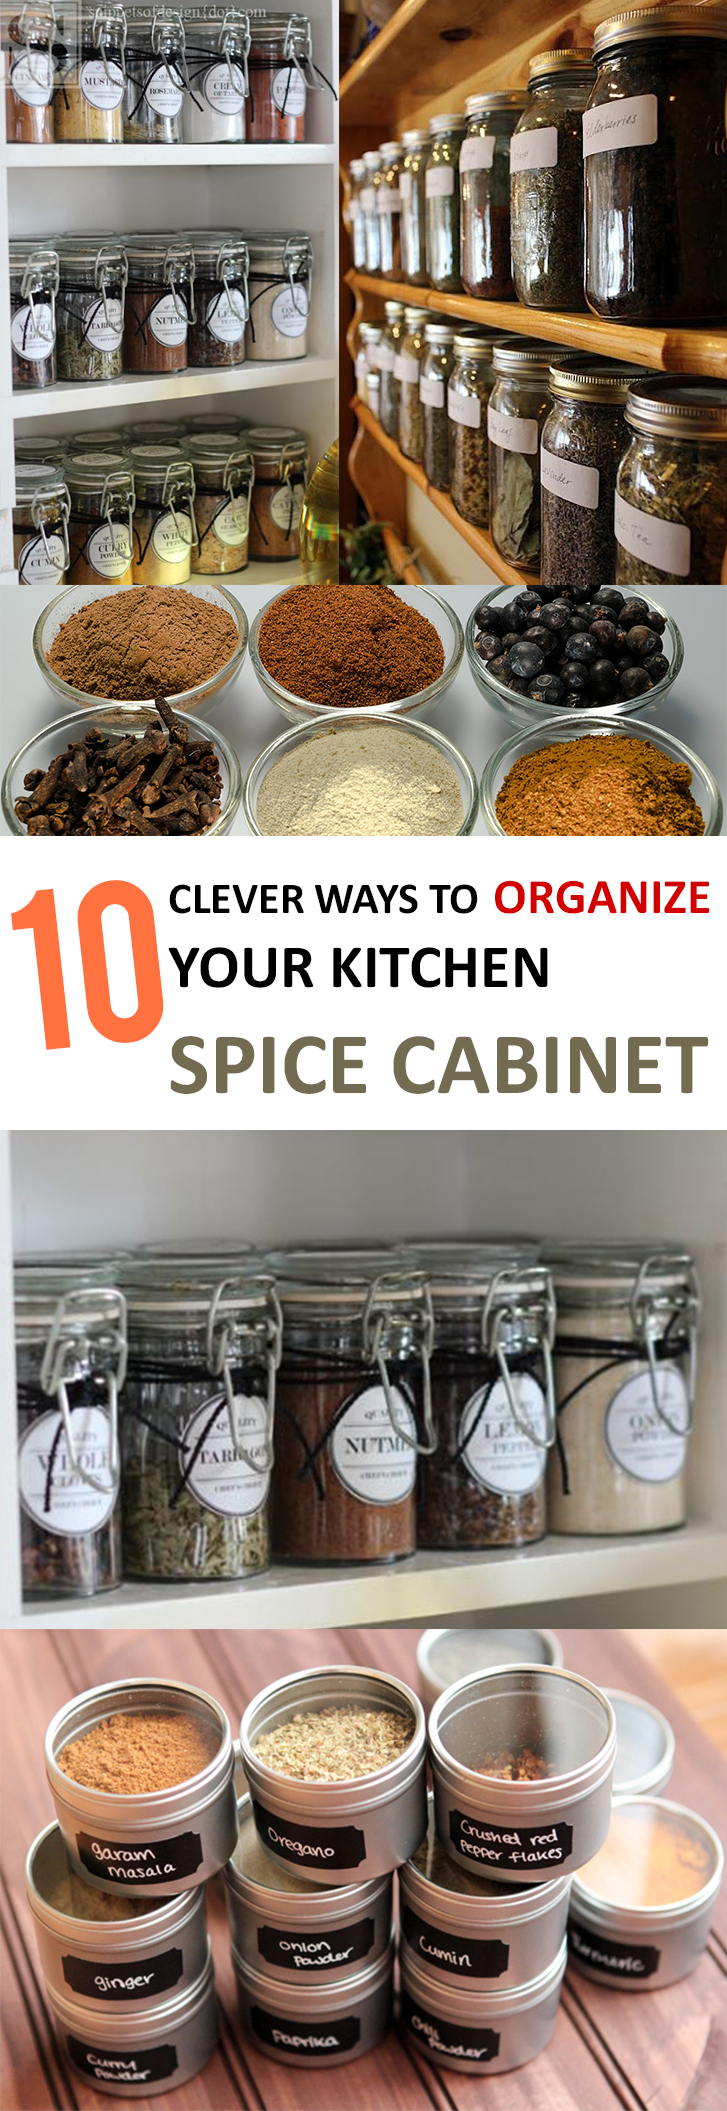 10 Clever Ways to Organize Your Kitchen Spice Cabinet (1)